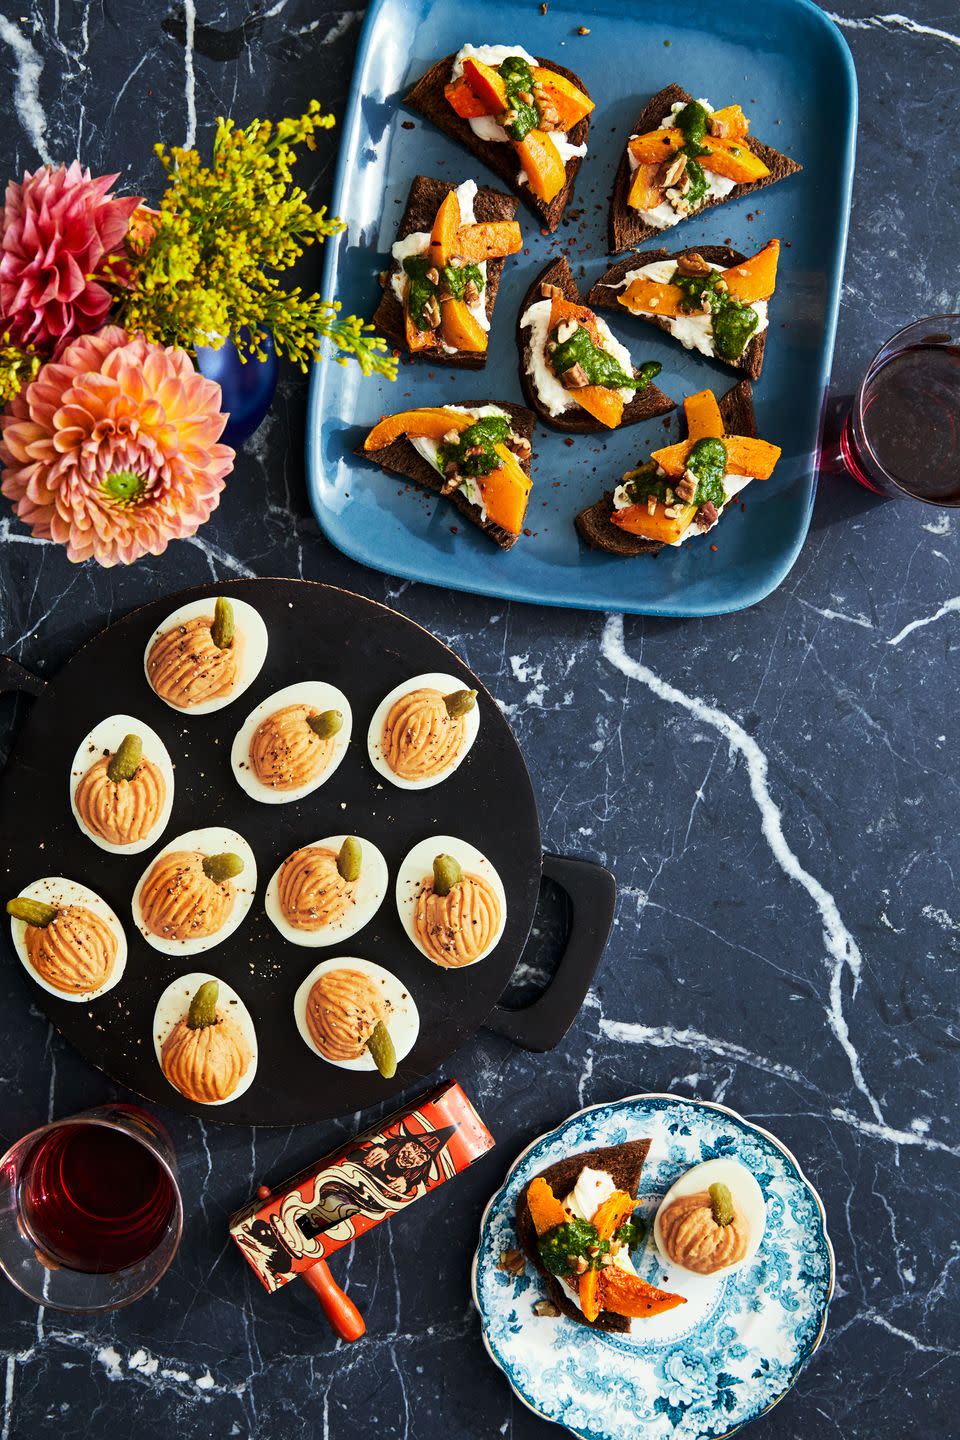 <p>Avoiding all sugar? These tasty snacks are great for hors d'oeuvres and still have plenty of seasonal flair.</p><p><strong><a href="https://www.countryliving.com/food-drinks/a33943615/pumpkin-and-pesto-crostini/" rel="nofollow noopener" target="_blank" data-ylk="slk:Get the recipe for Pumpkin & Pesto Crostini" class="link ">Get the recipe for Pumpkin & Pesto Crostini</a>.</strong></p>